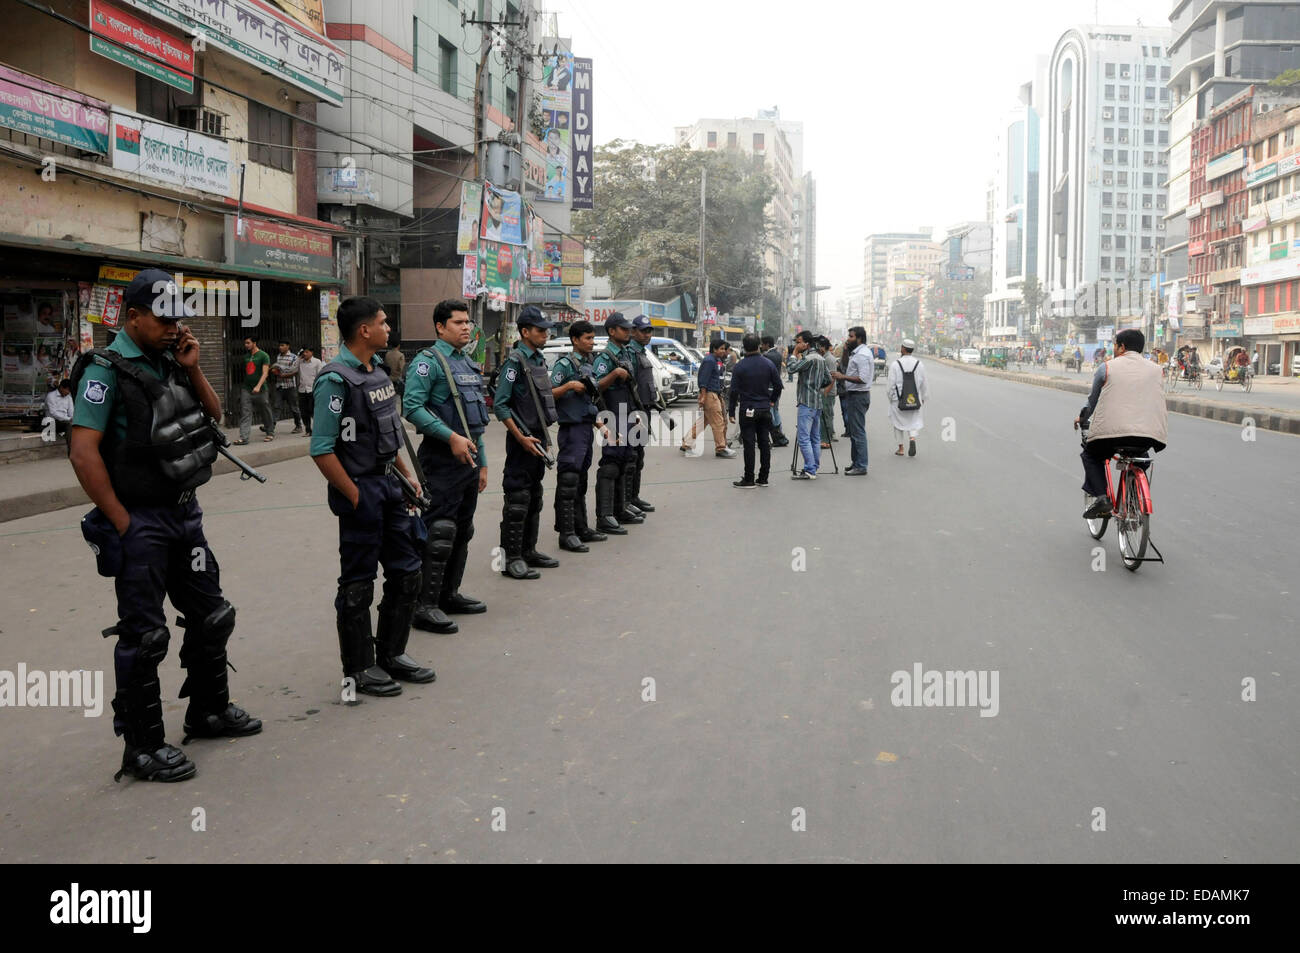 (150104) -- DHAKA, Jan. 4, 2015 (Xinhua) -- Bangladeshi policemen stand guard in front of the Bangladesh Nationalist Party (BNP) office in Dhaka, Bangladesh, Jan. 4, 2015. Bangladesh's former prime minister Khaleda Zia, also chairperson of BNP, has remained cordoned off inside her office in capital Dhaka's Gushan diplomatic enclave since Saturday night. Police have also locked down the BNP's headquarters after searching it. (Xinhua/Shariful Islam)(zhf) Stock Photo